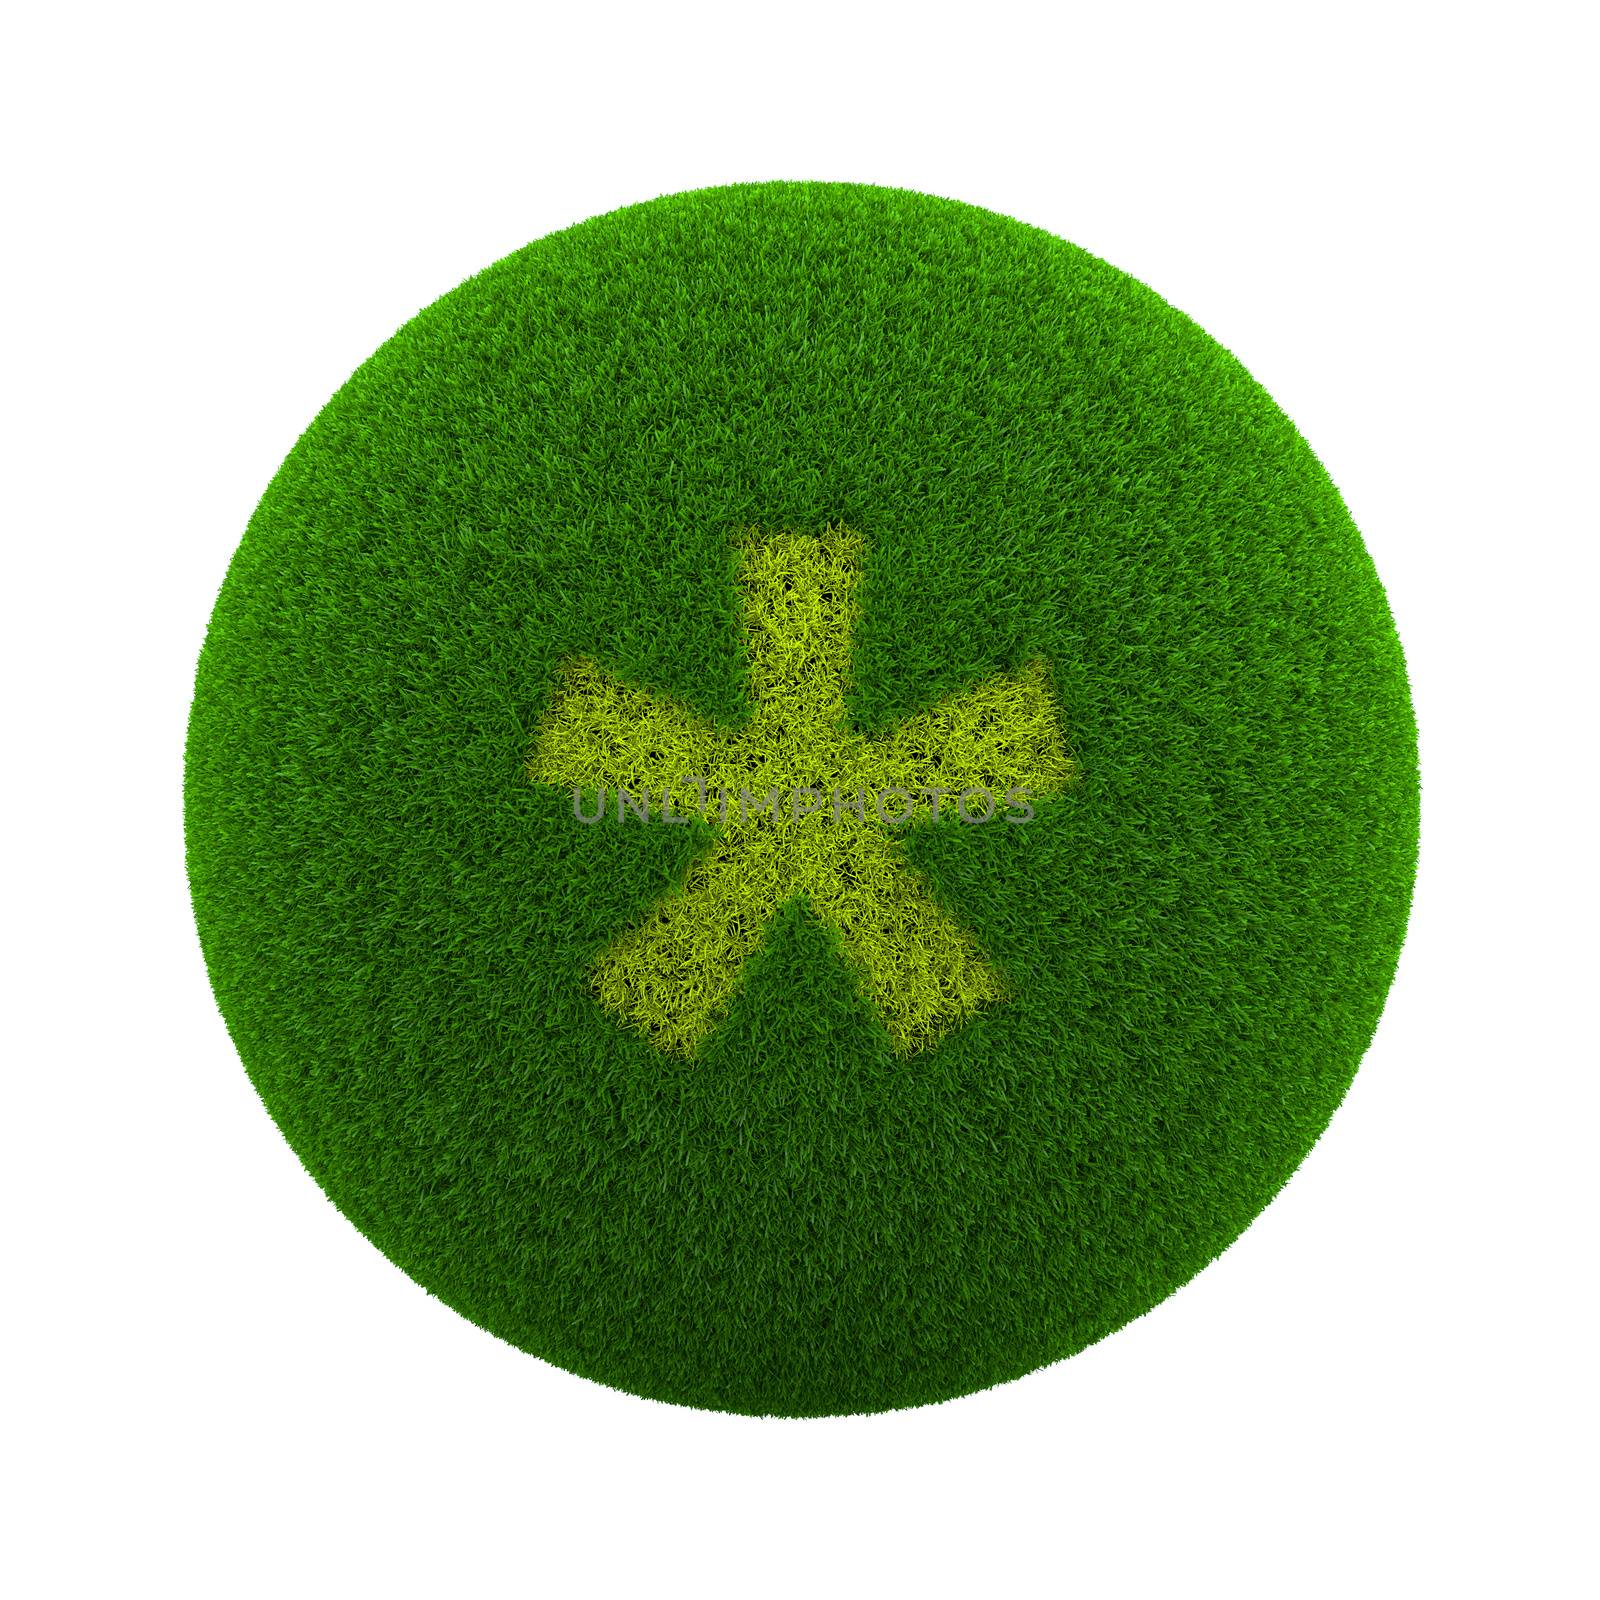 Green Globe with Grass Cutted in the Shape of an Asterisk Symbol 3D Illustration Isolated on White Background